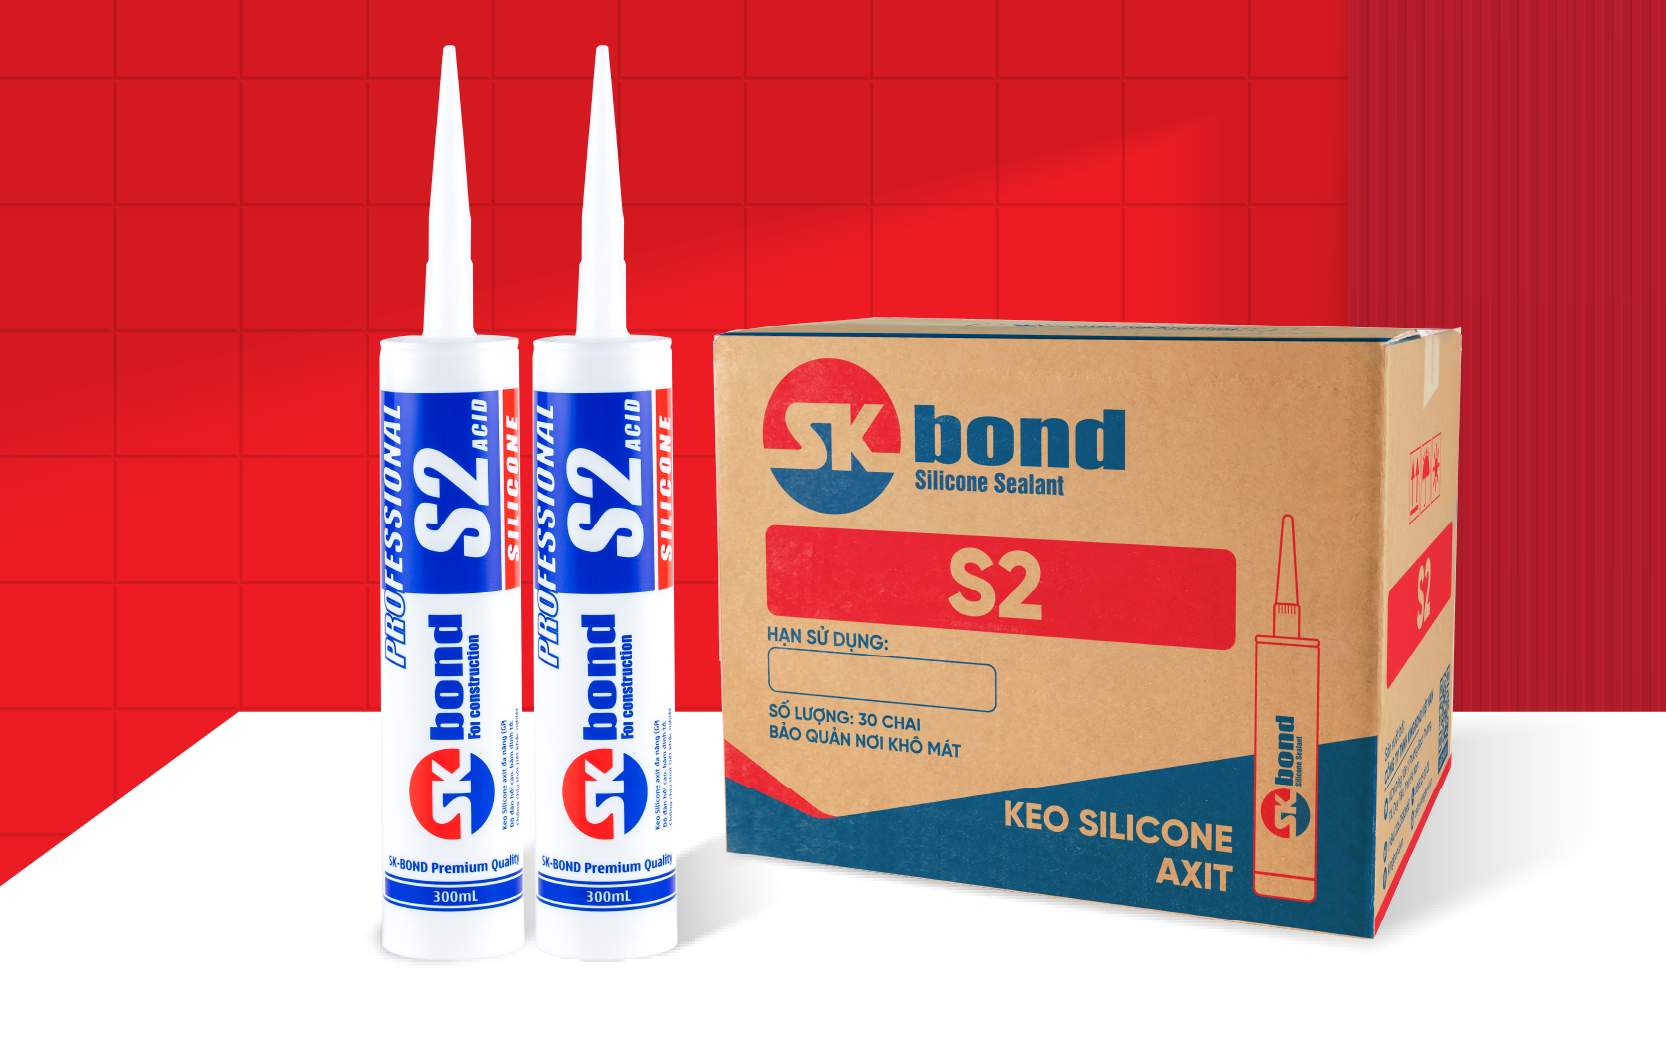 Keo silicone axit S2 - Công Ty TNHH Kingbond Việt Nam